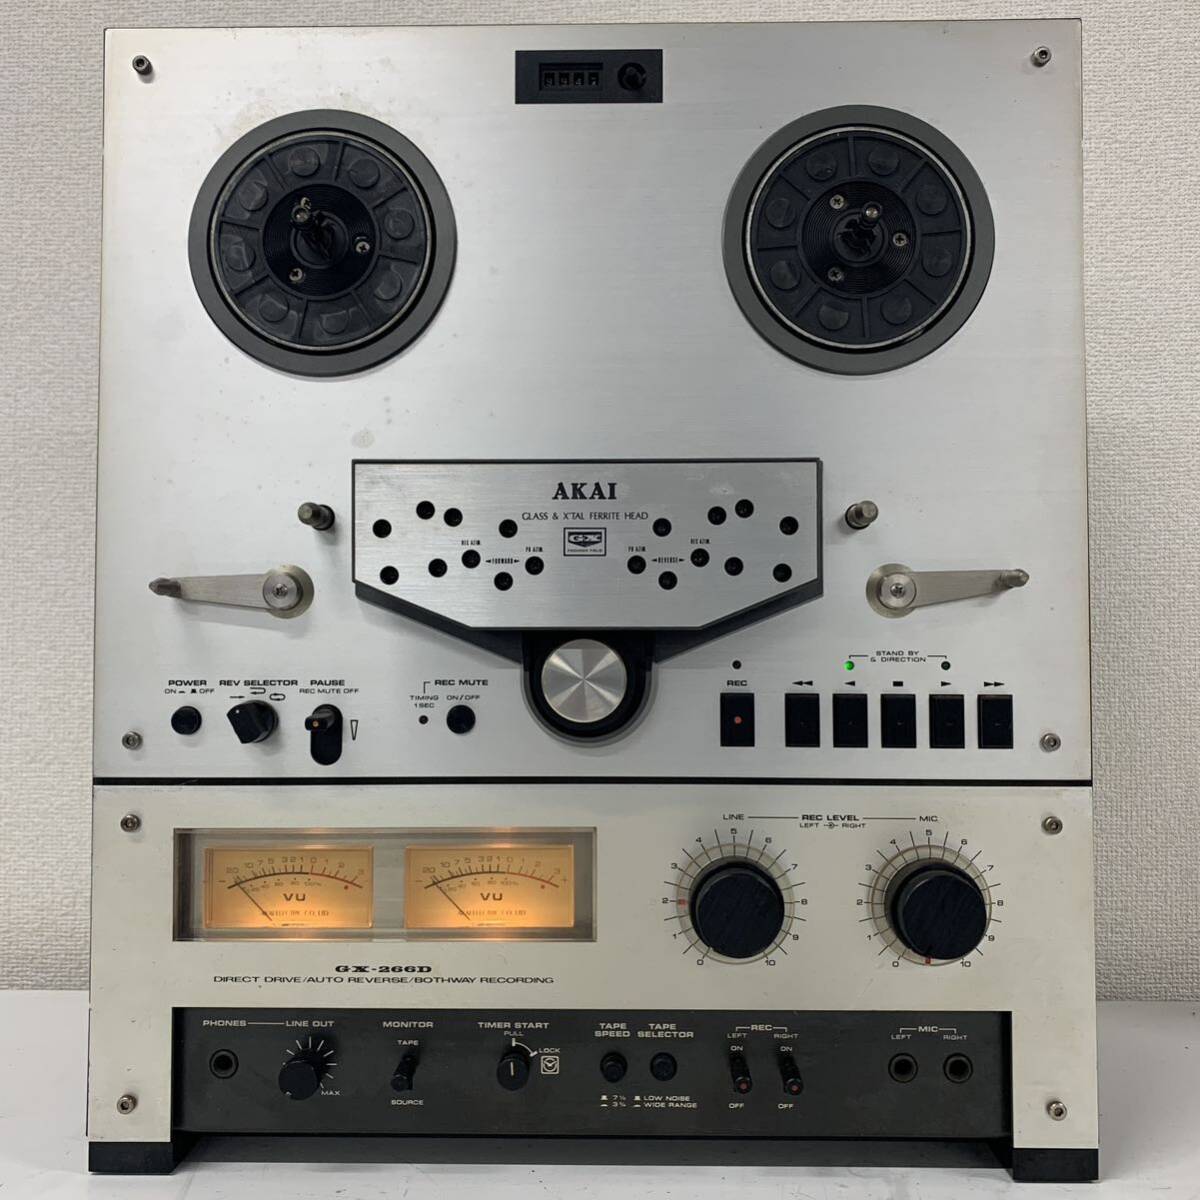 [Ia-2] AKAI GX-266D open reel deck Akai sound quality defect equipped rotation defect equipped use un- possible necessary maintenance goods Junk 1756-50